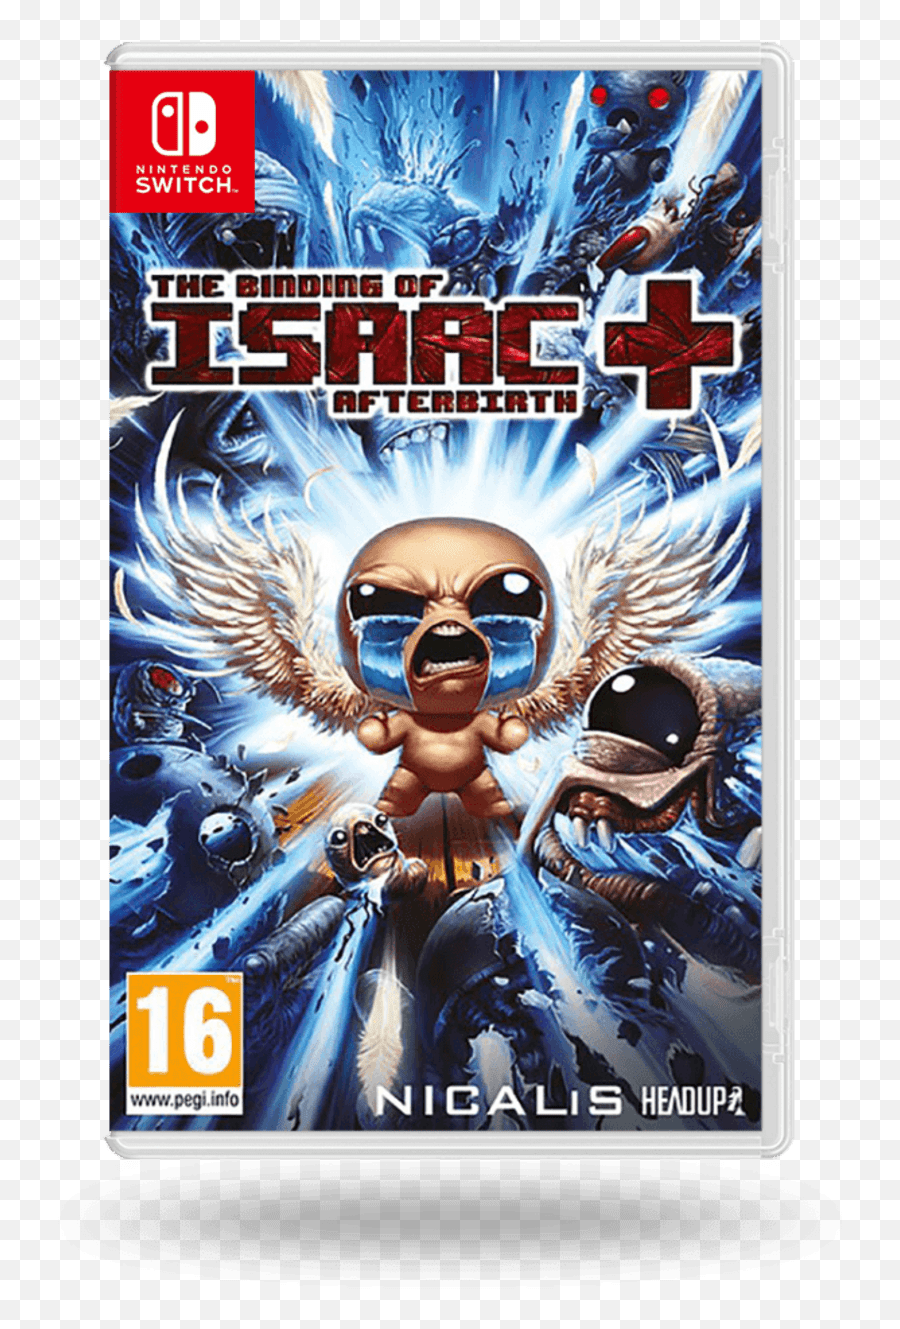 Buy The Binding Of Isaac Afterbirth Switch Cheap Price Eneba Emoji,Binding Of Isaac Steam Emoticons